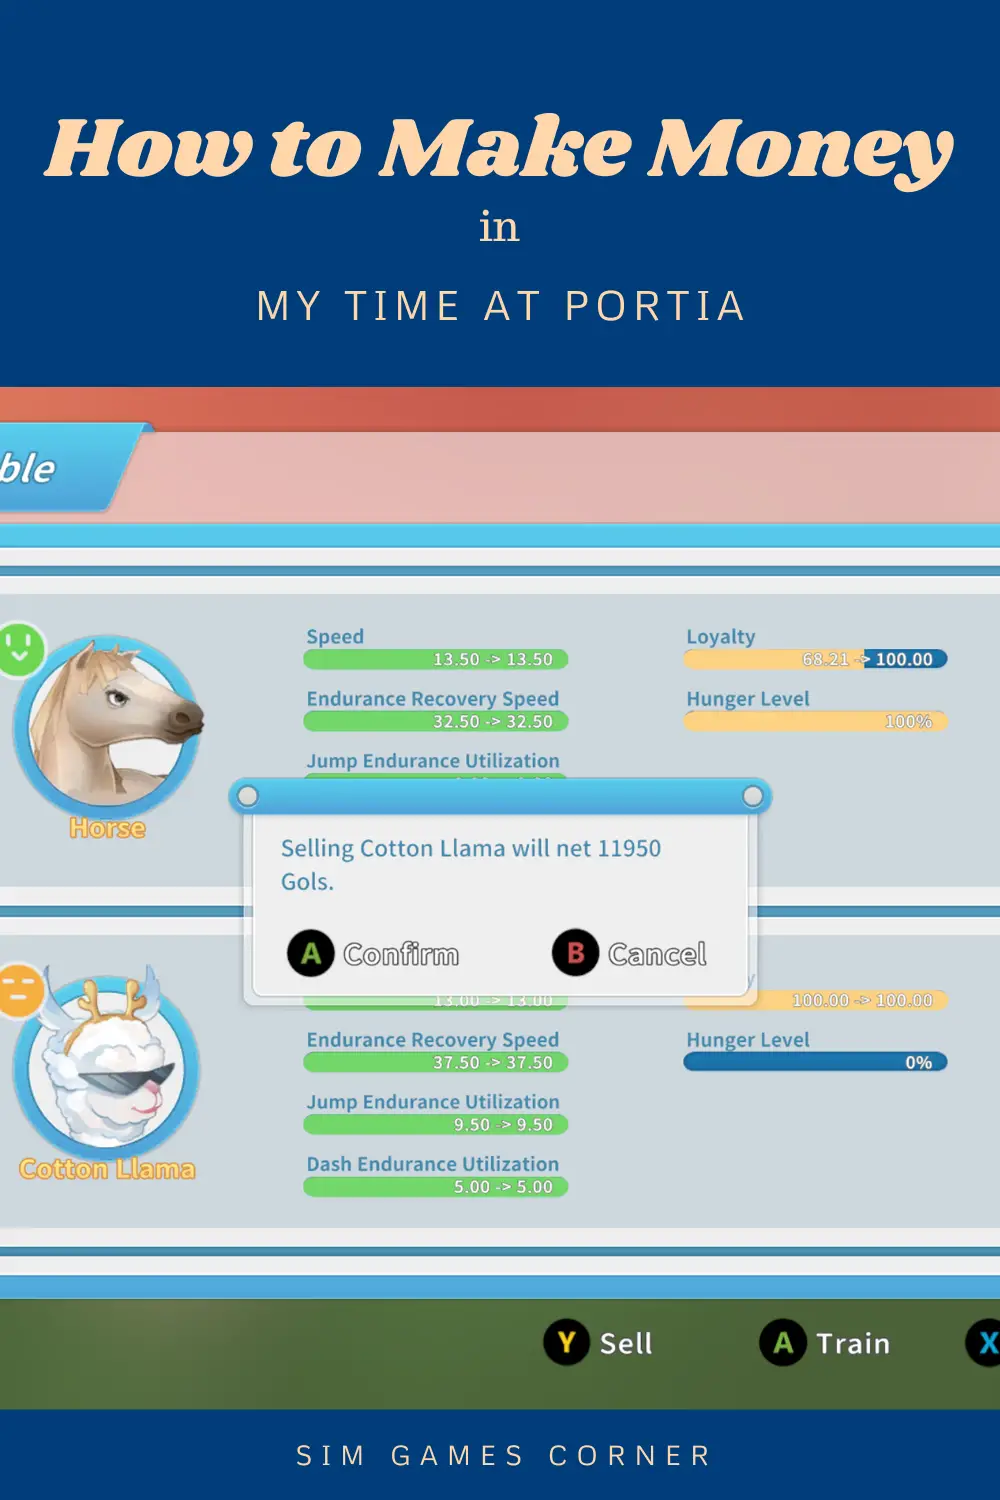 A picture of a How to make Money In My Time at Portia pin that is asking the reader to pin the image.